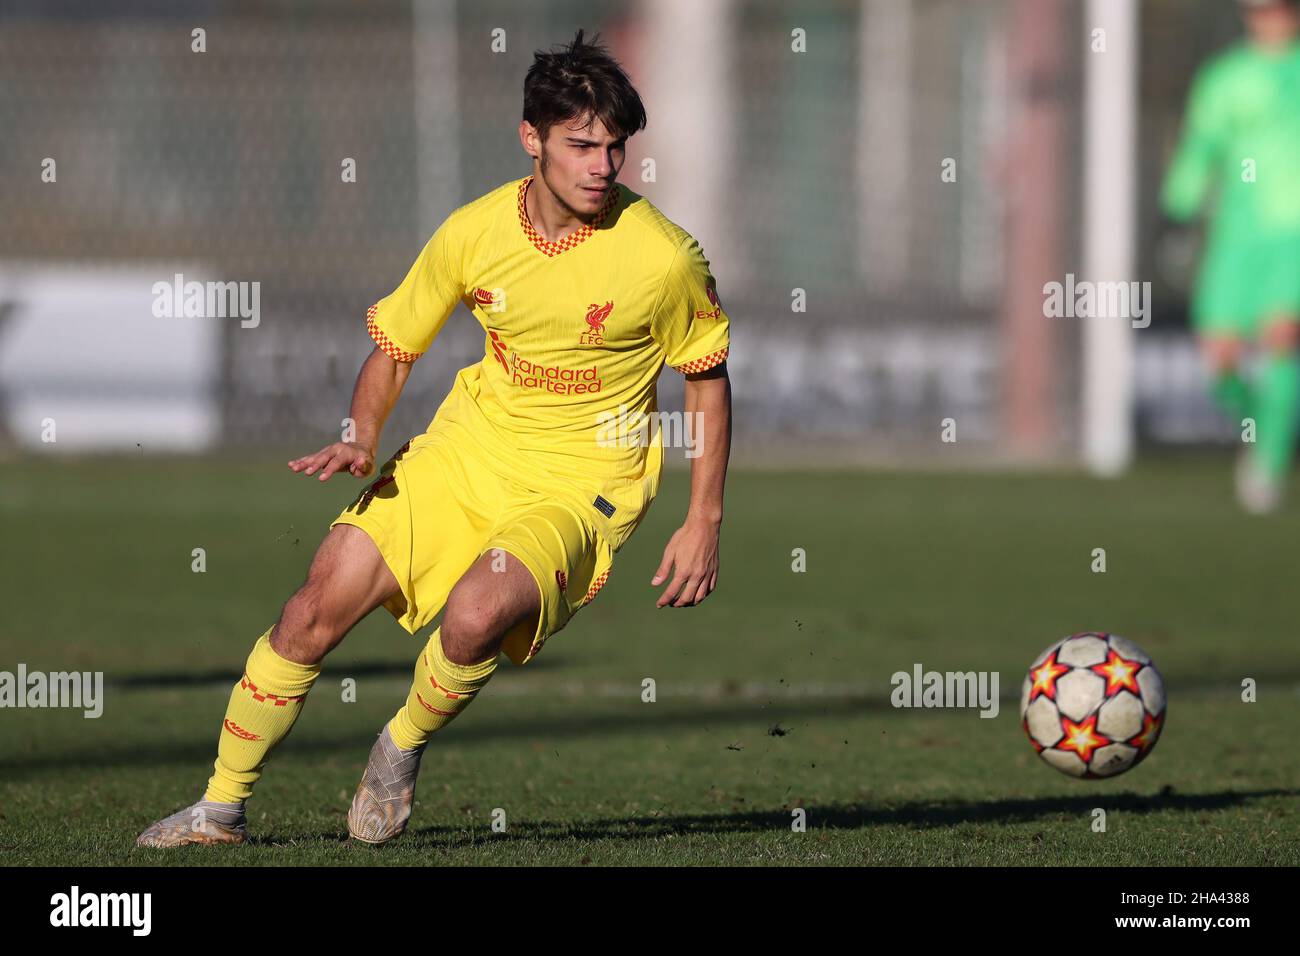 Milan, Italy. 7th Dec, 2021. Oakley Cannonier of Liverpool during the UEFA  Youth League match at